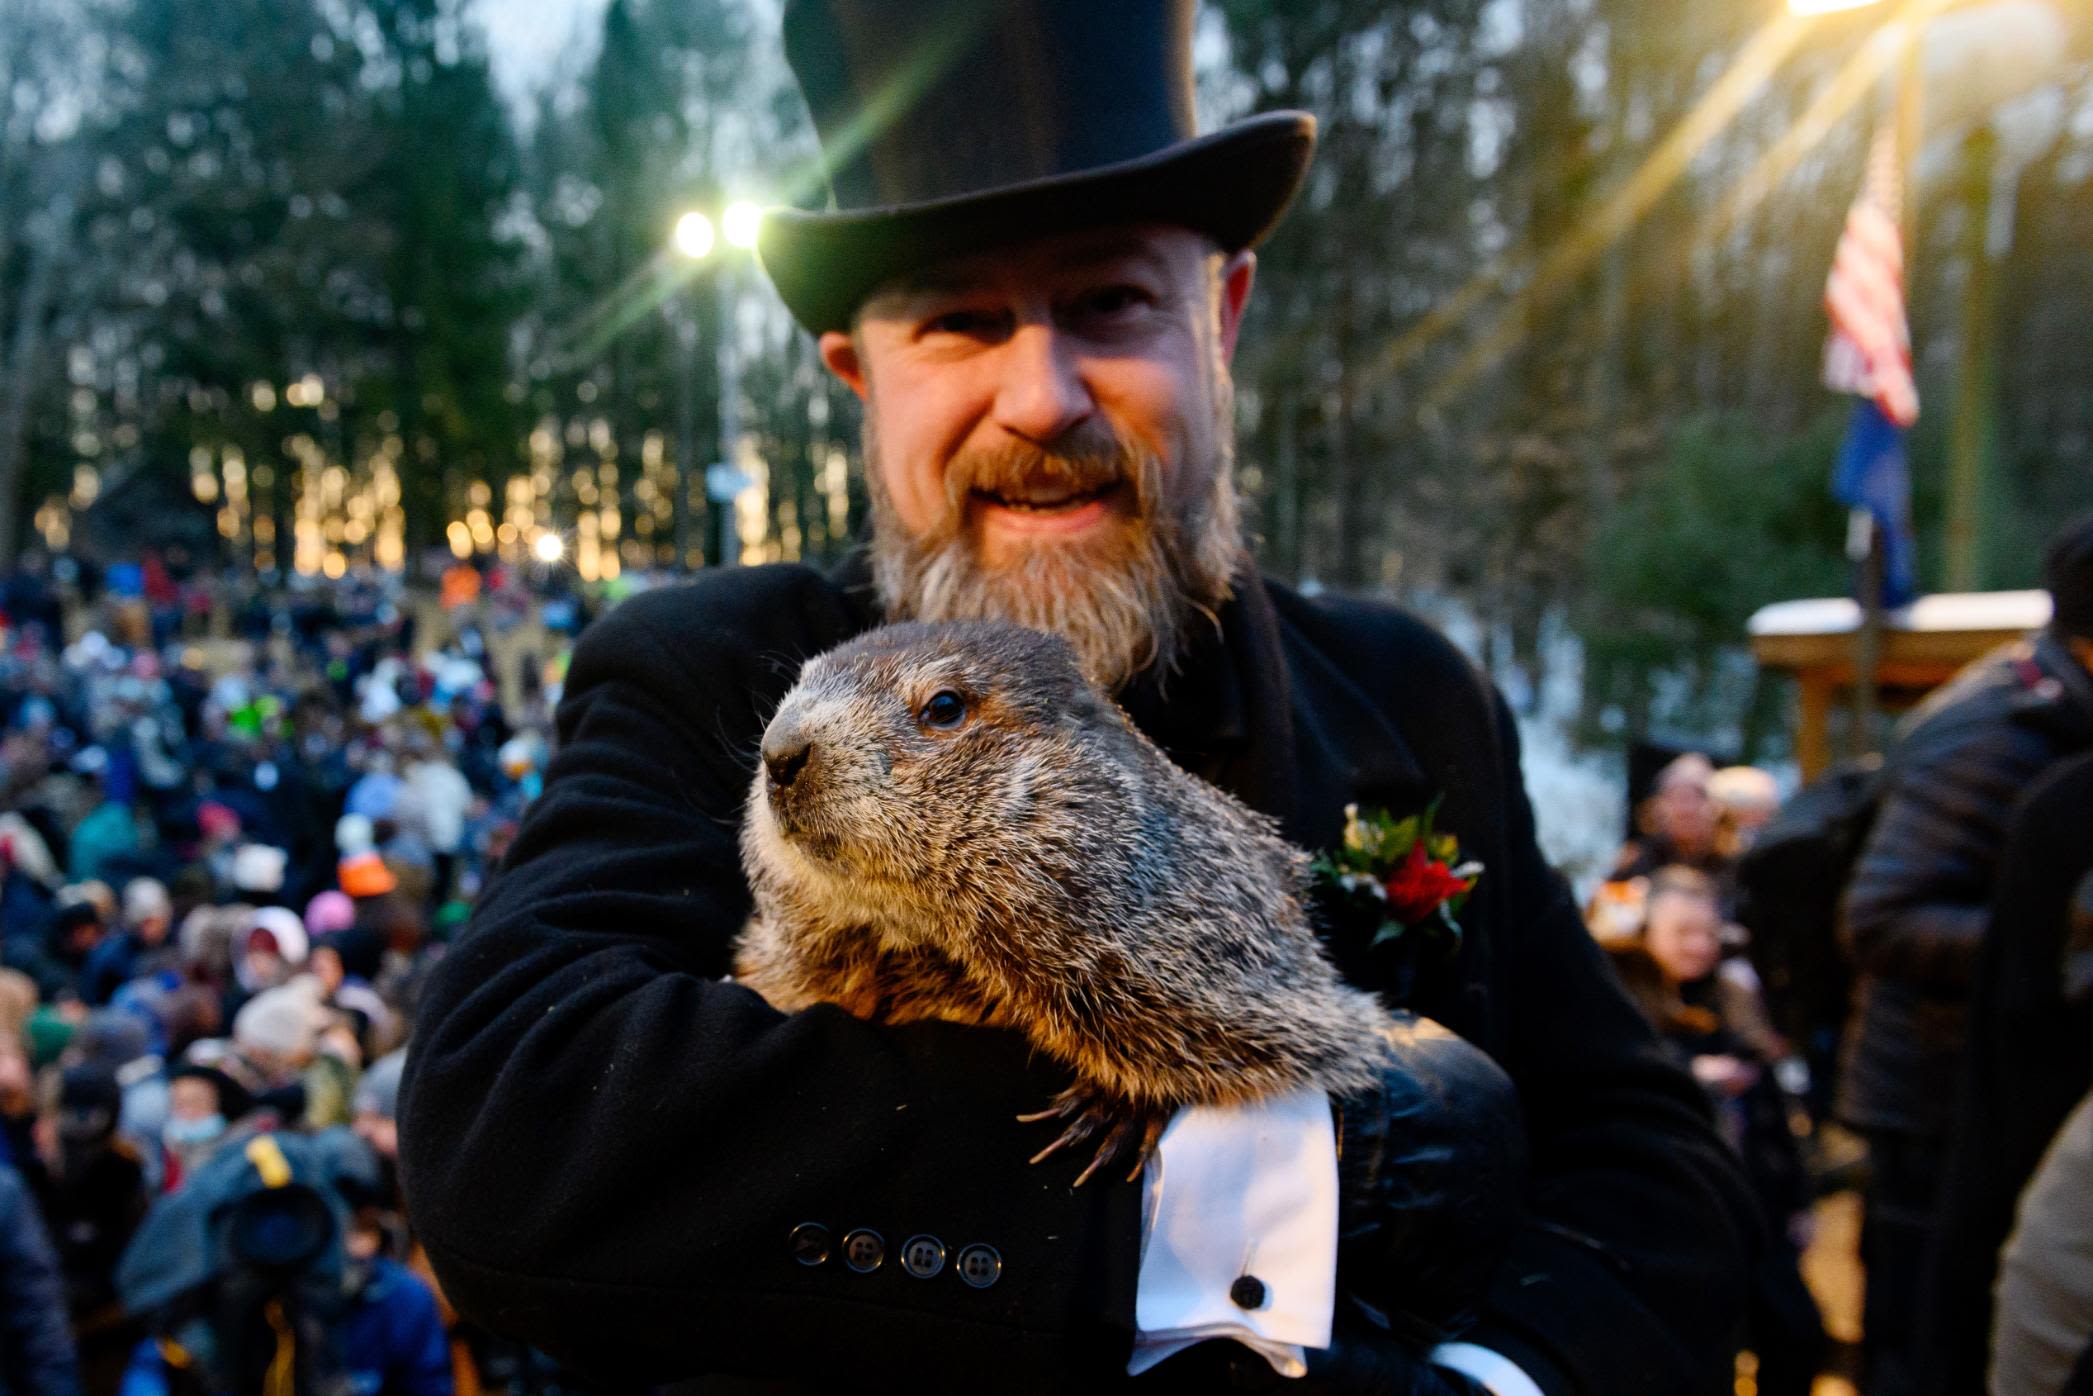 And who could forget Punxsutawney Phil, one of the most famous animals with a job. Every year, the groundhog exits his winter den in February as thousands of onlookers in Punxsutawney, Pennsylvania, wait to see if his shadow is visible. If it is, legend says six more weeks of bad wintry weather is ahead.